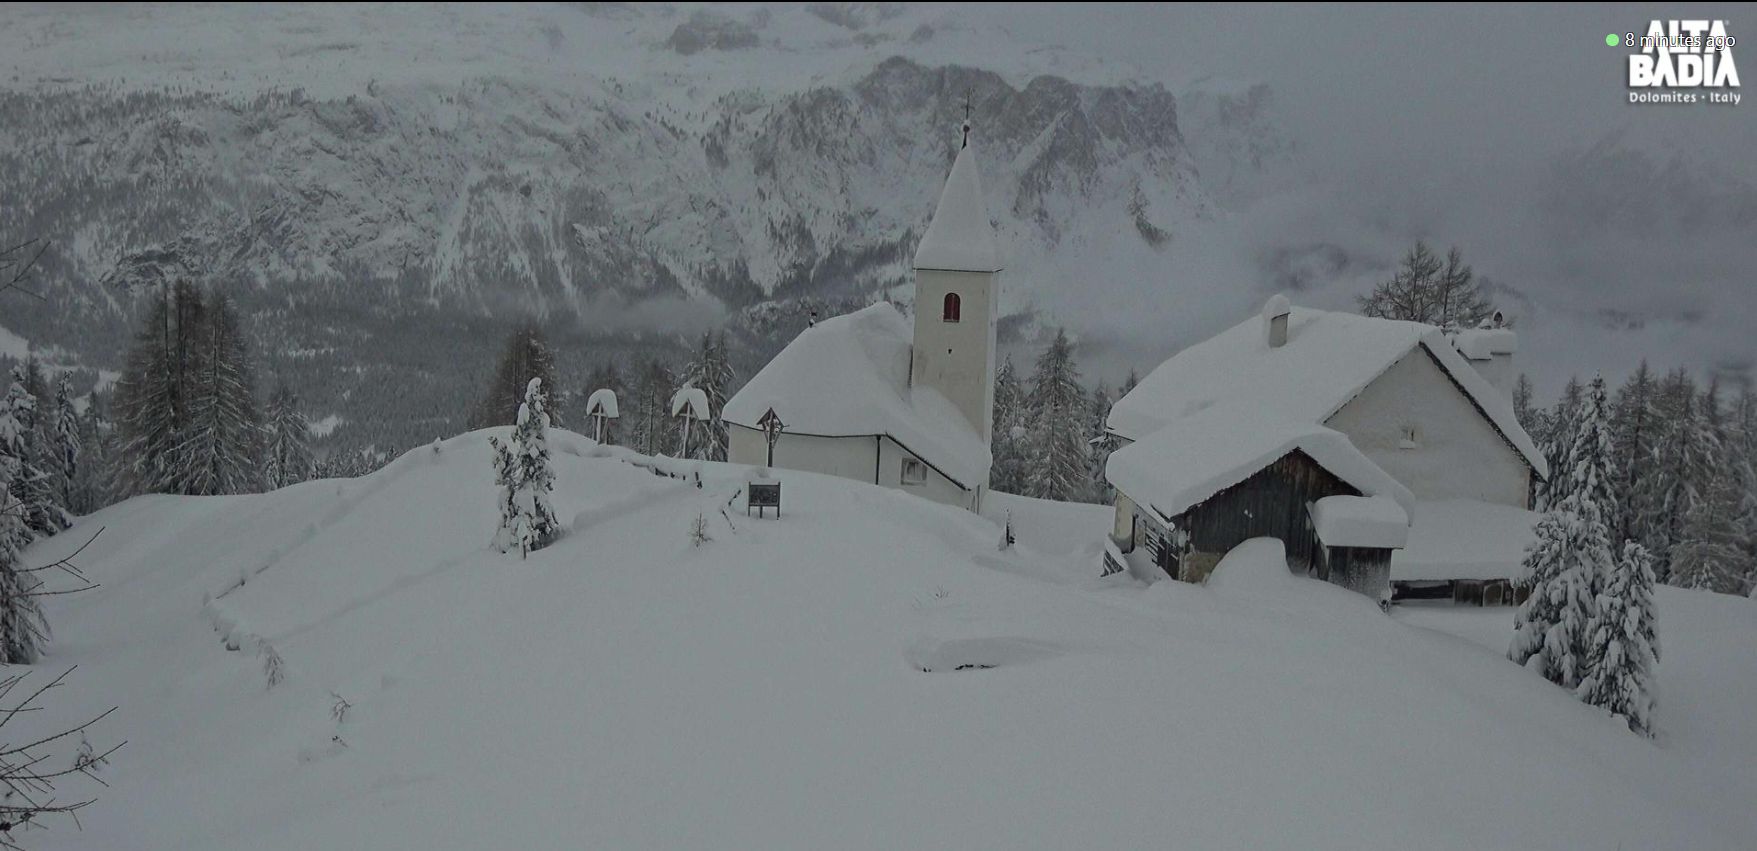 The Dolomites are covered with a thick layer of snow